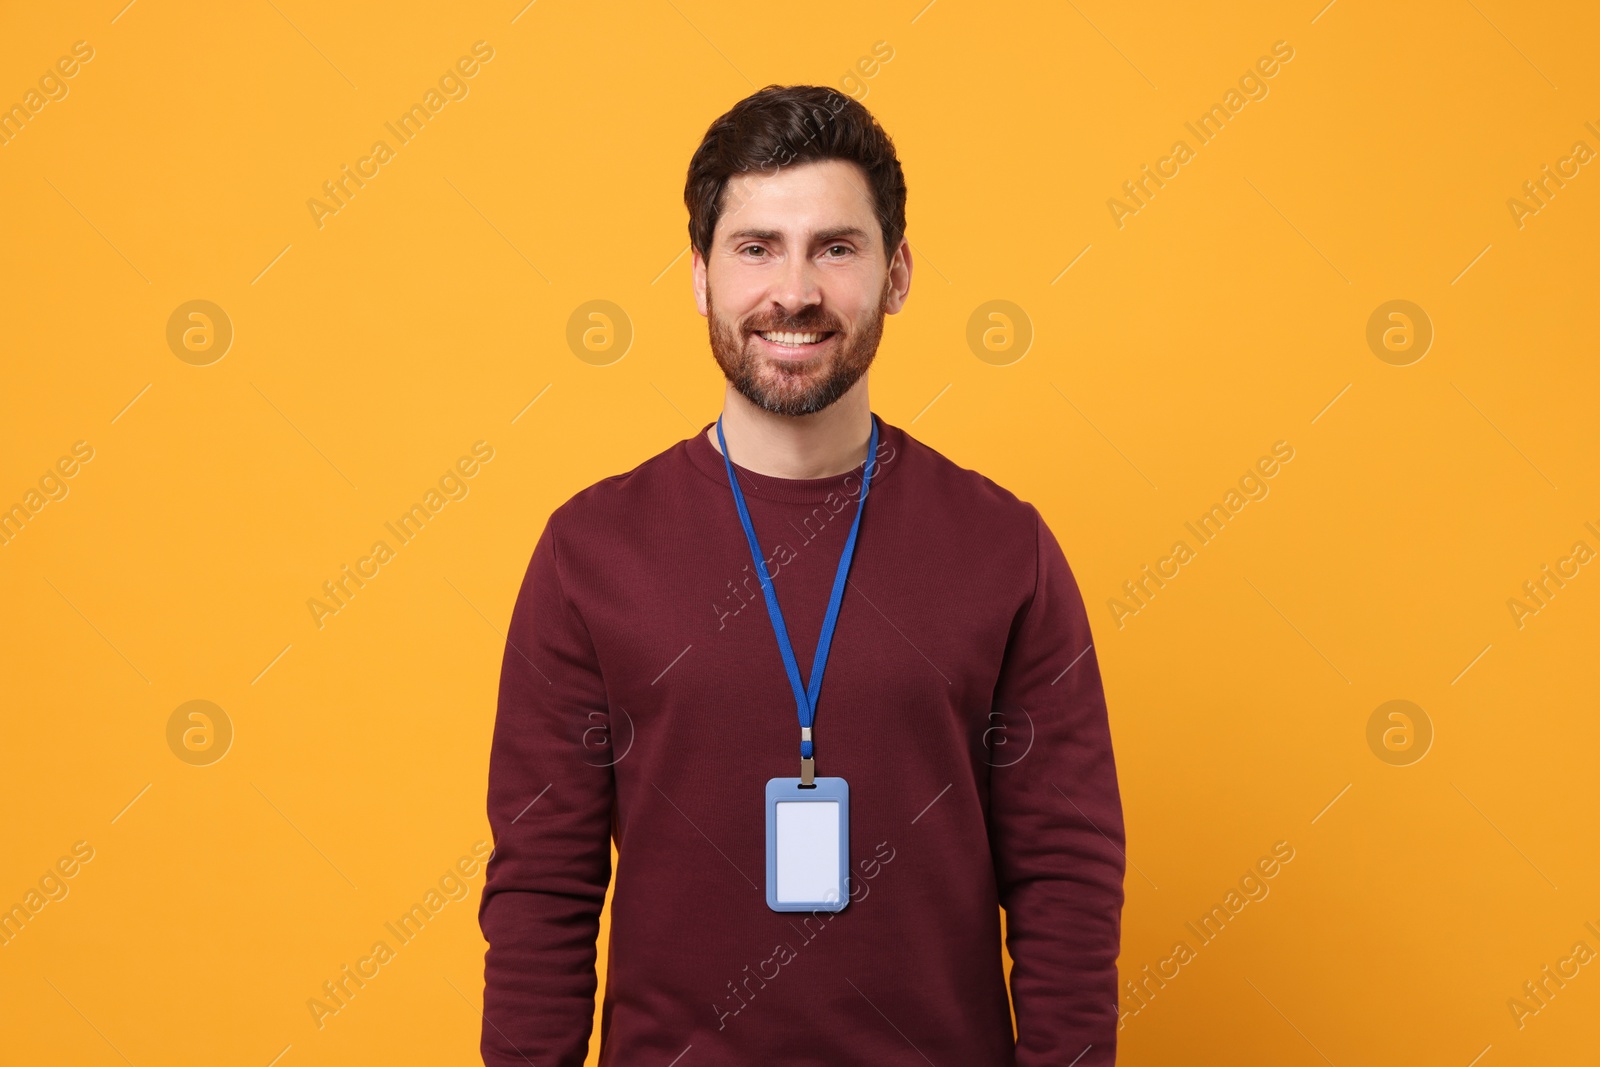 Photo of Smiling man with VIP pass badge on orange background